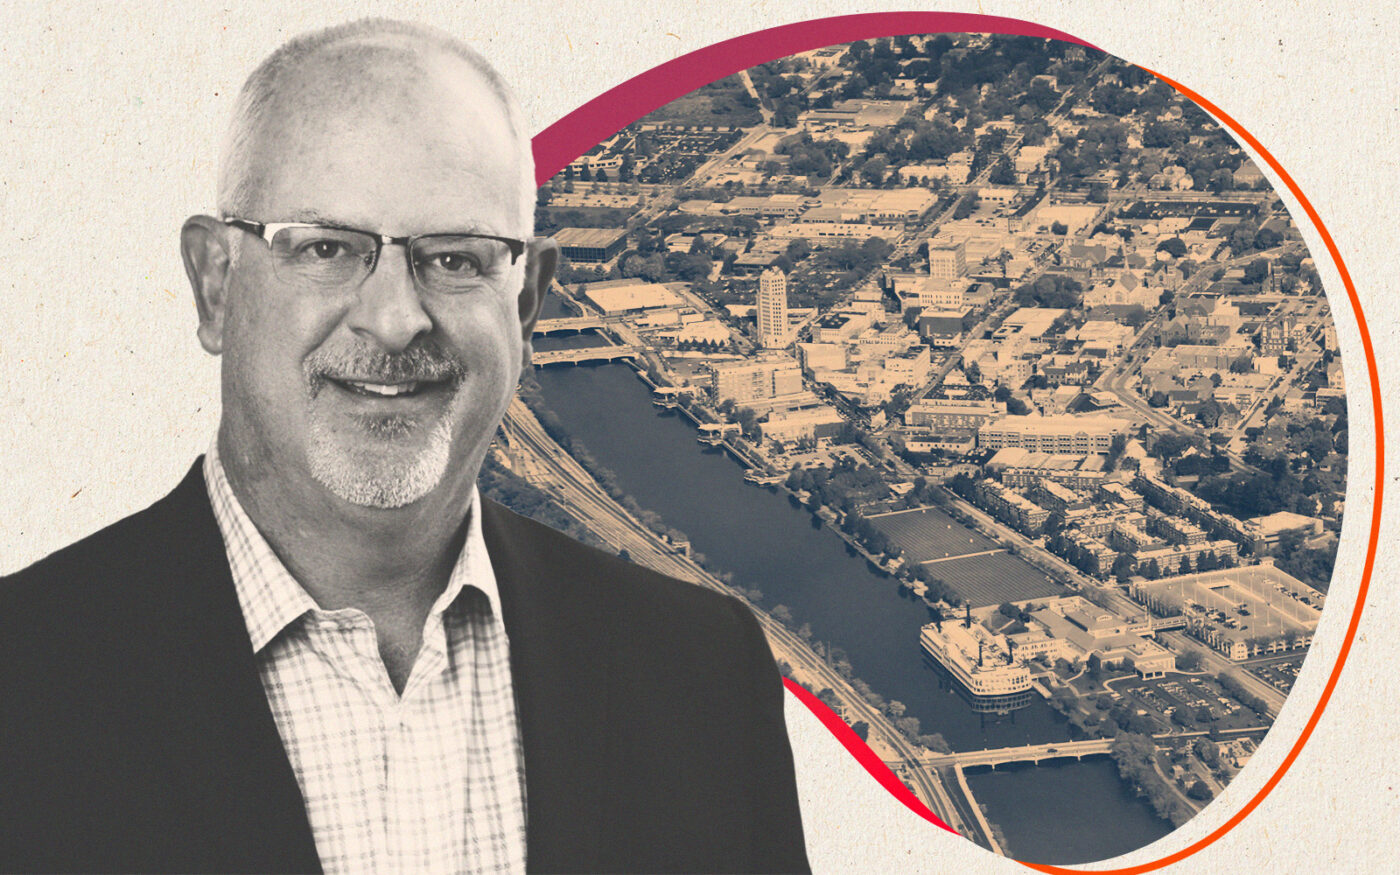 Fiduciary Real Estate Development's Brett Miller with aerial view of Downtown Elgin